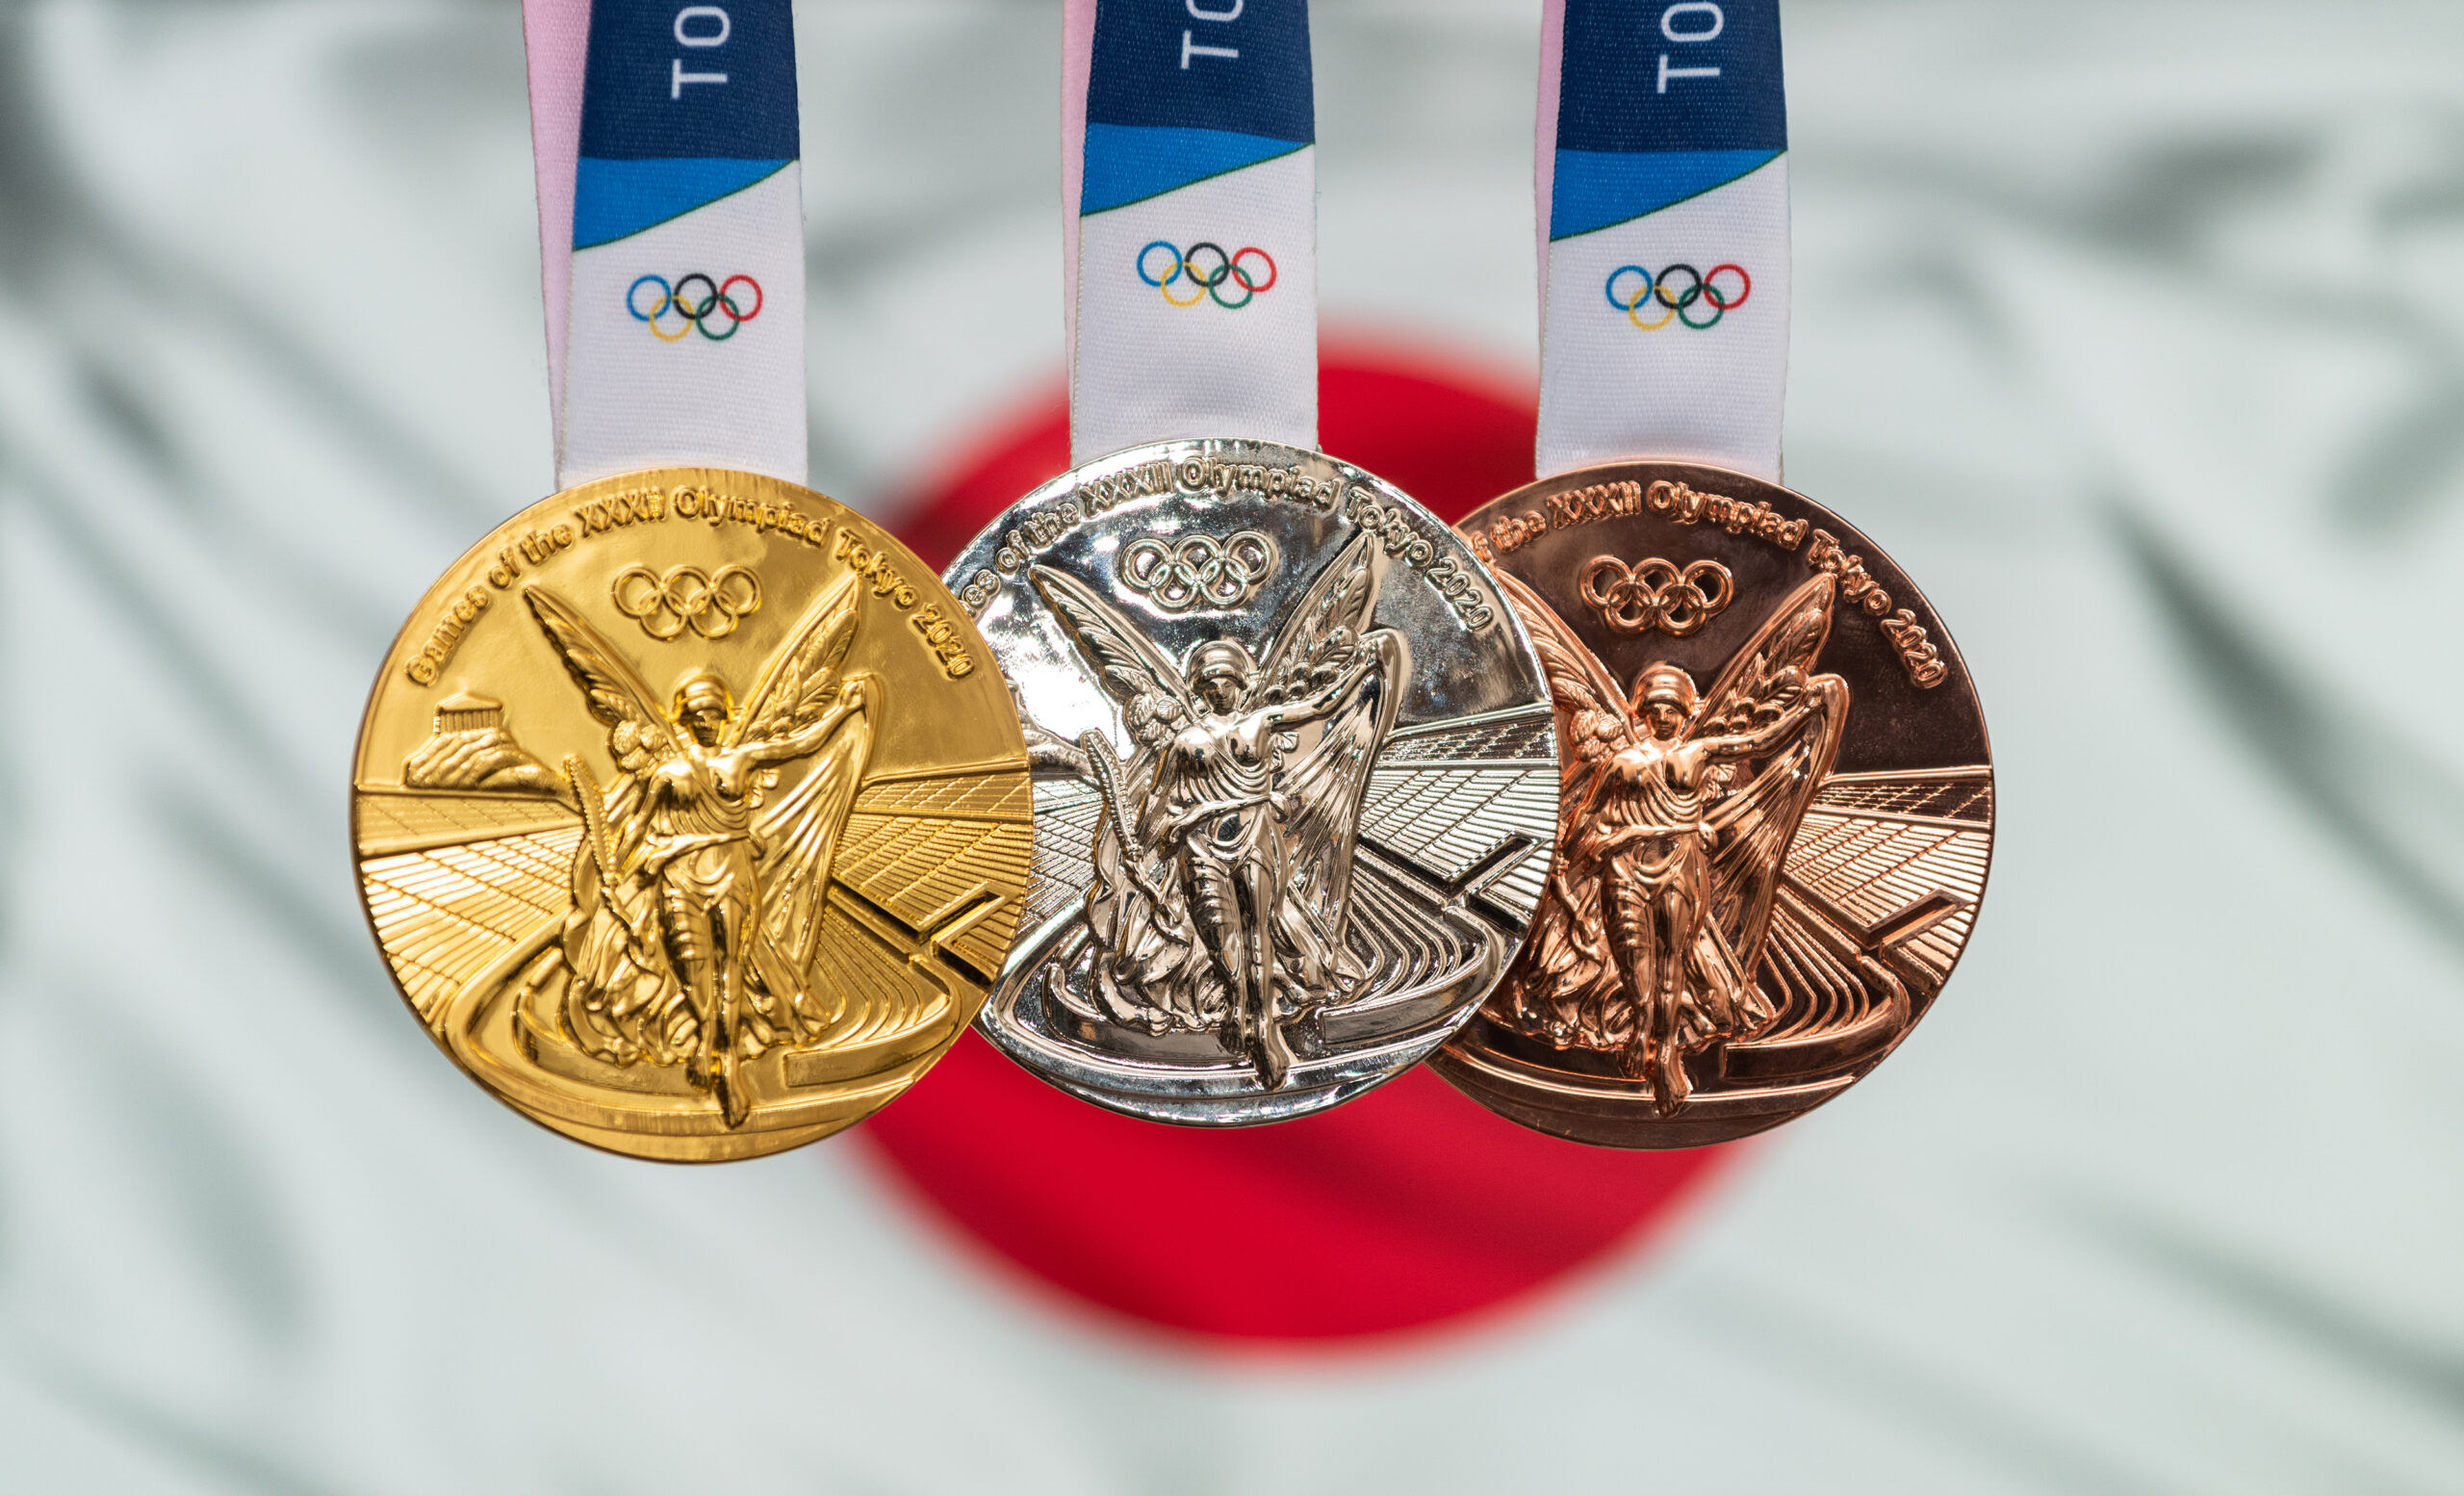 April 25, 2021 Tokyo, Japan. Gold, silver and bronze medals of the XXXII Summer Olympic Games 2020